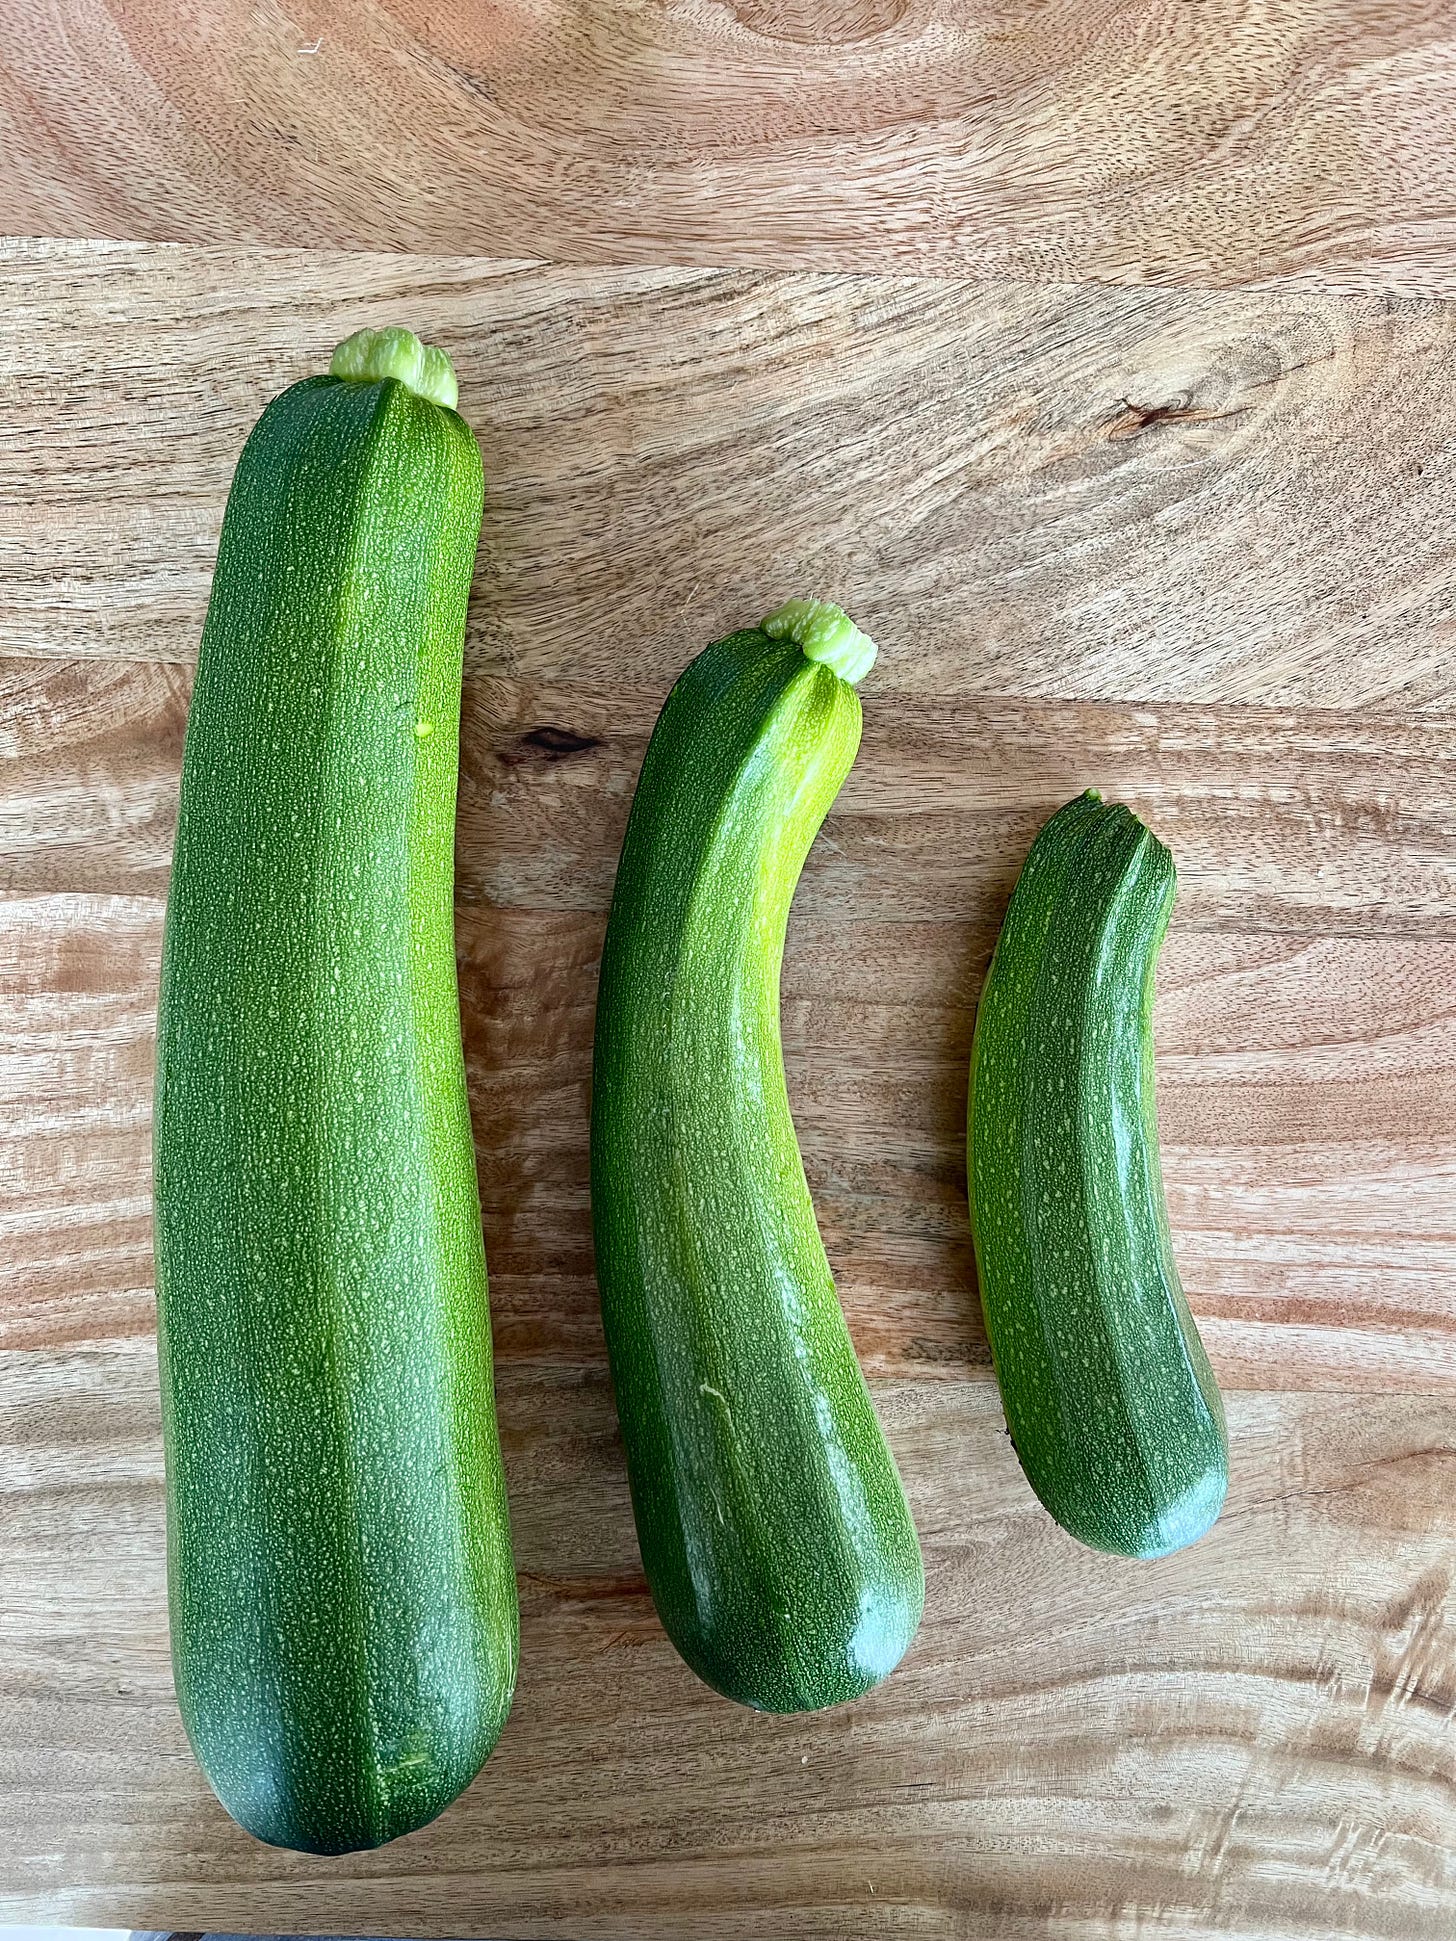 Photo of 3 zucchini on a wood table.